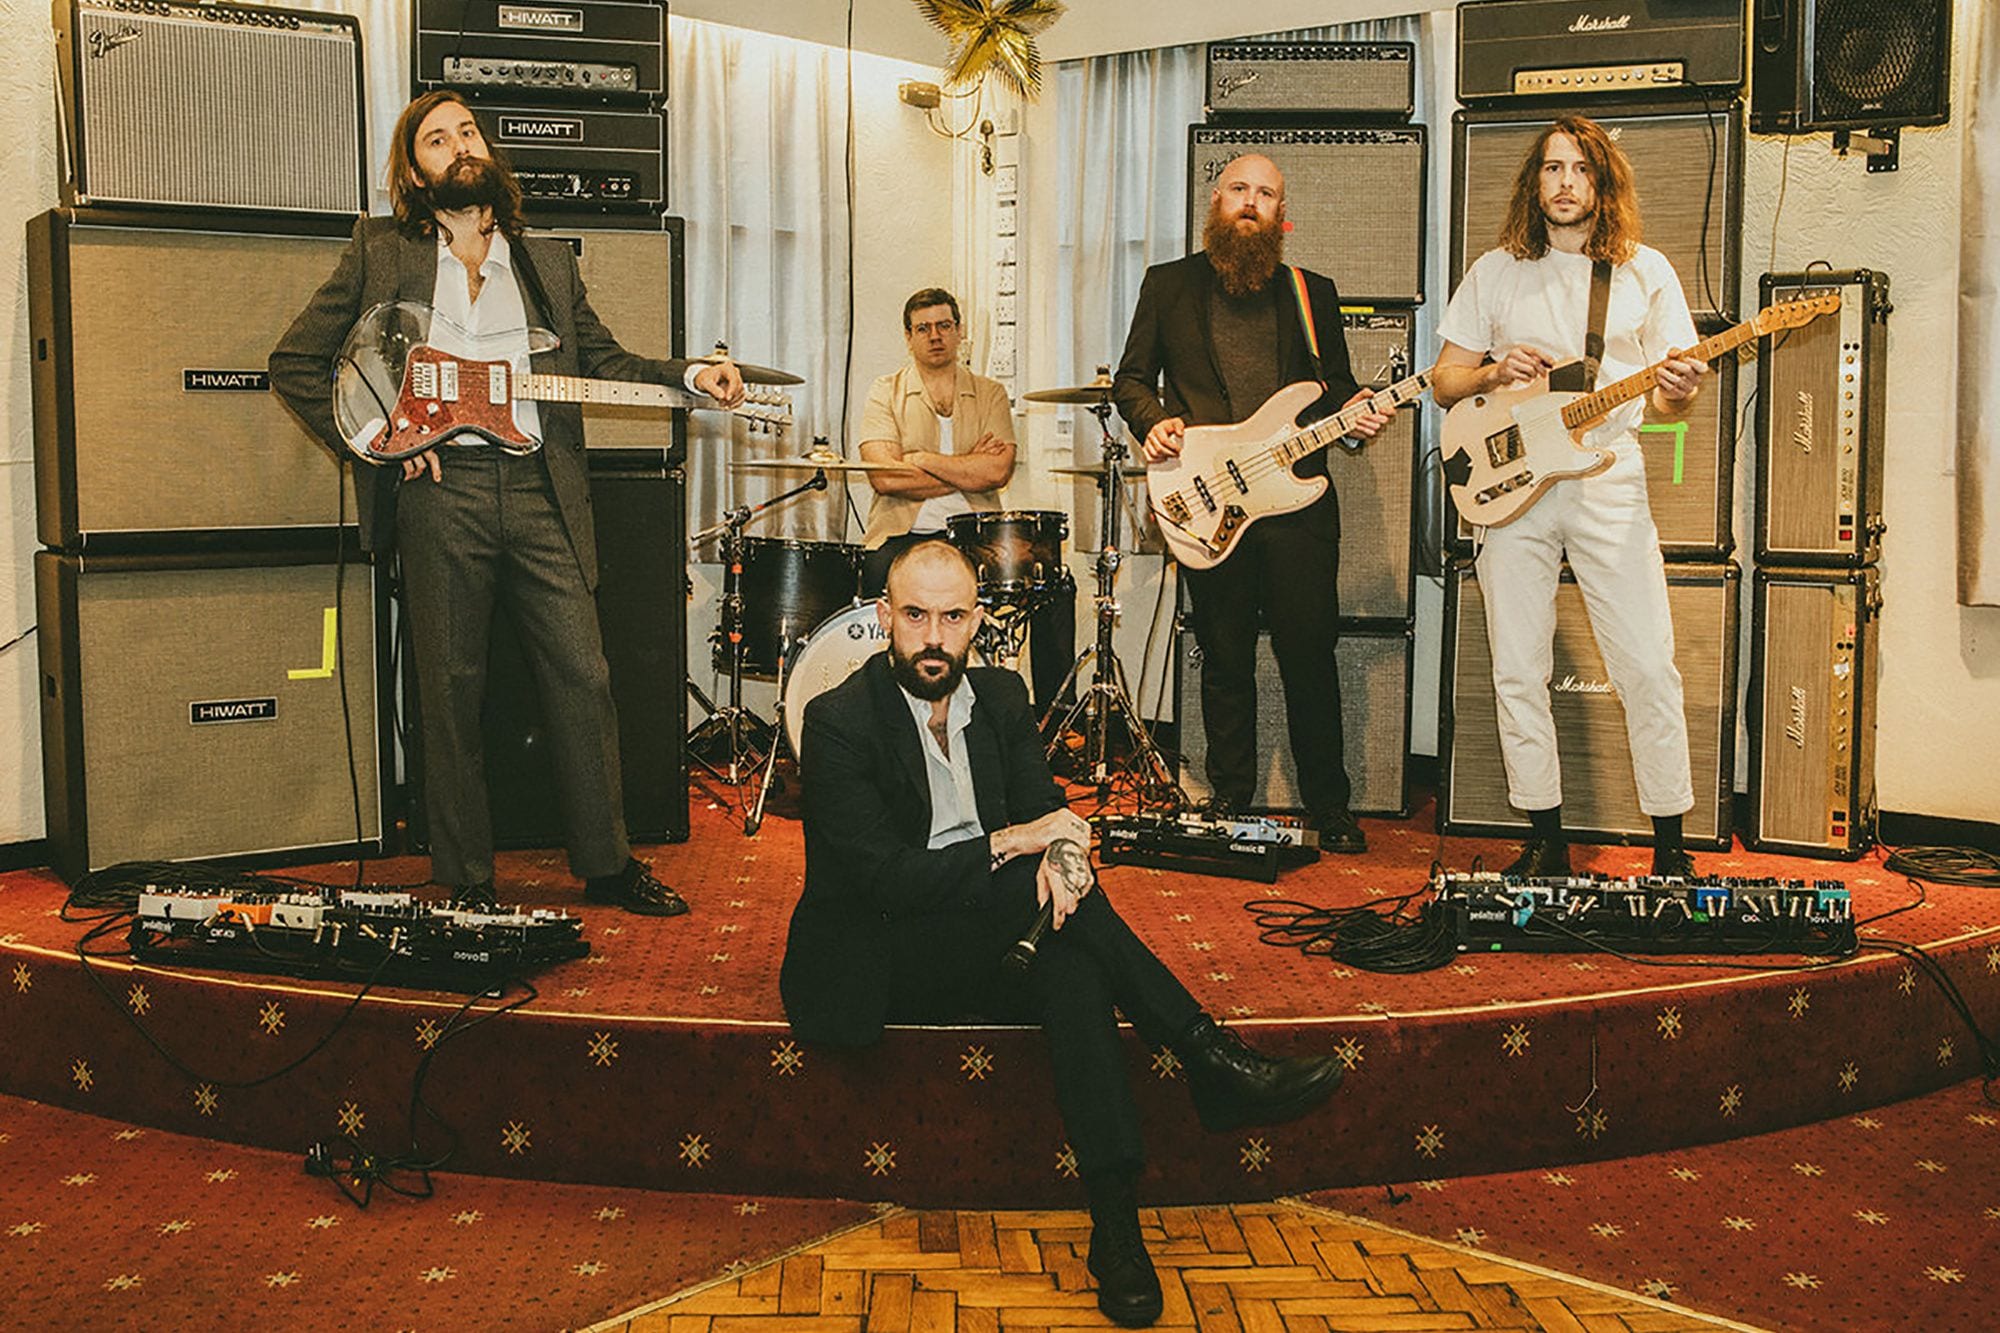 IDLES Have Some Words for Fans and Critics on ‘Ultra Mono’